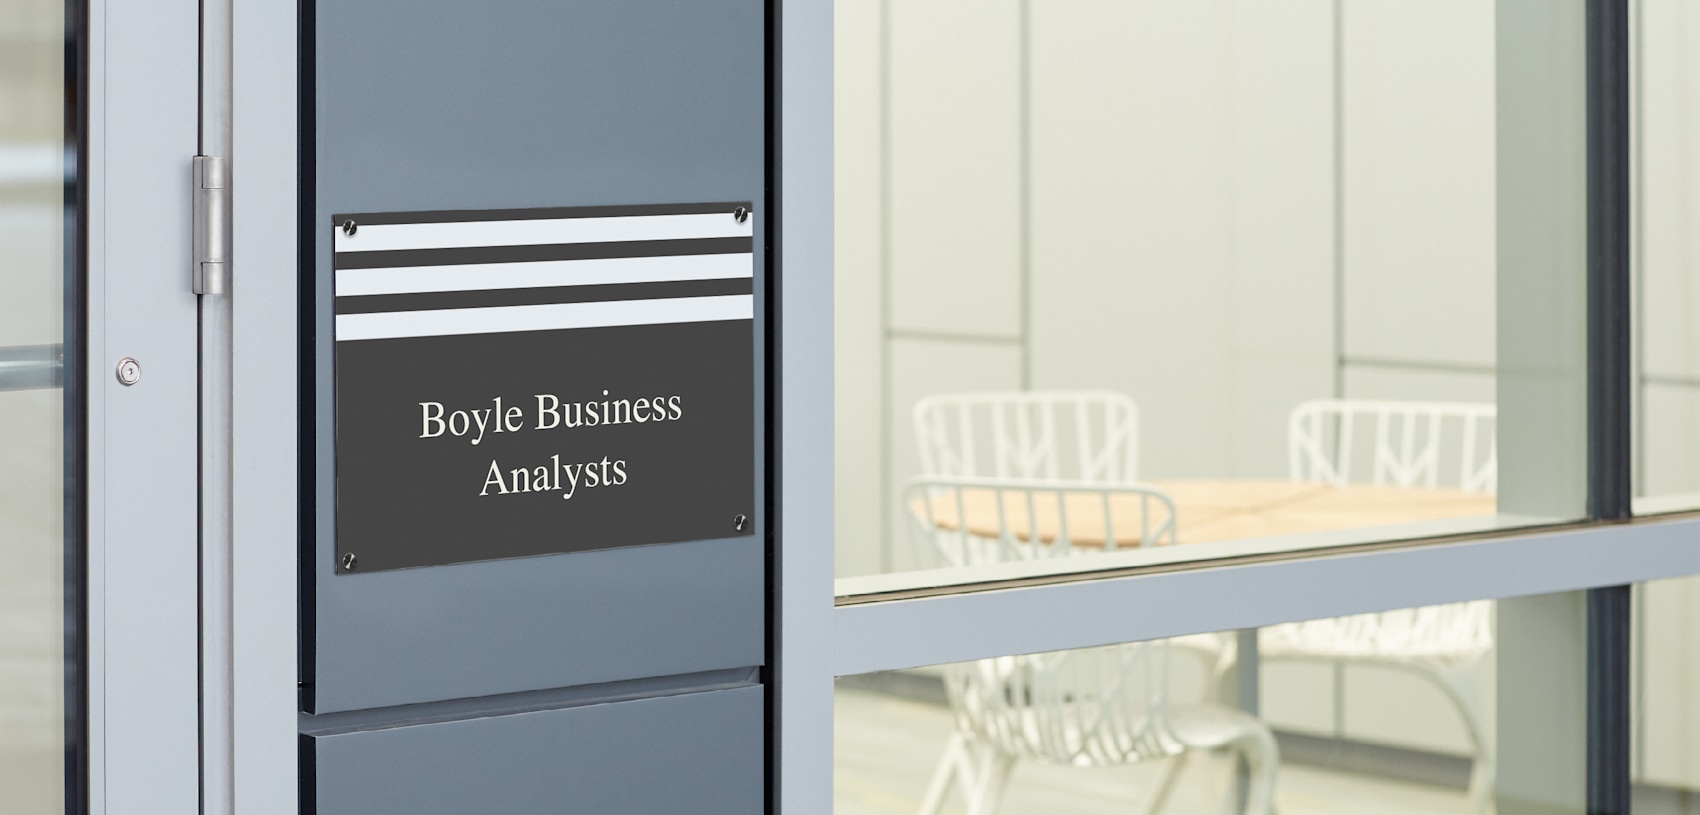 metal sign printing for business analysts